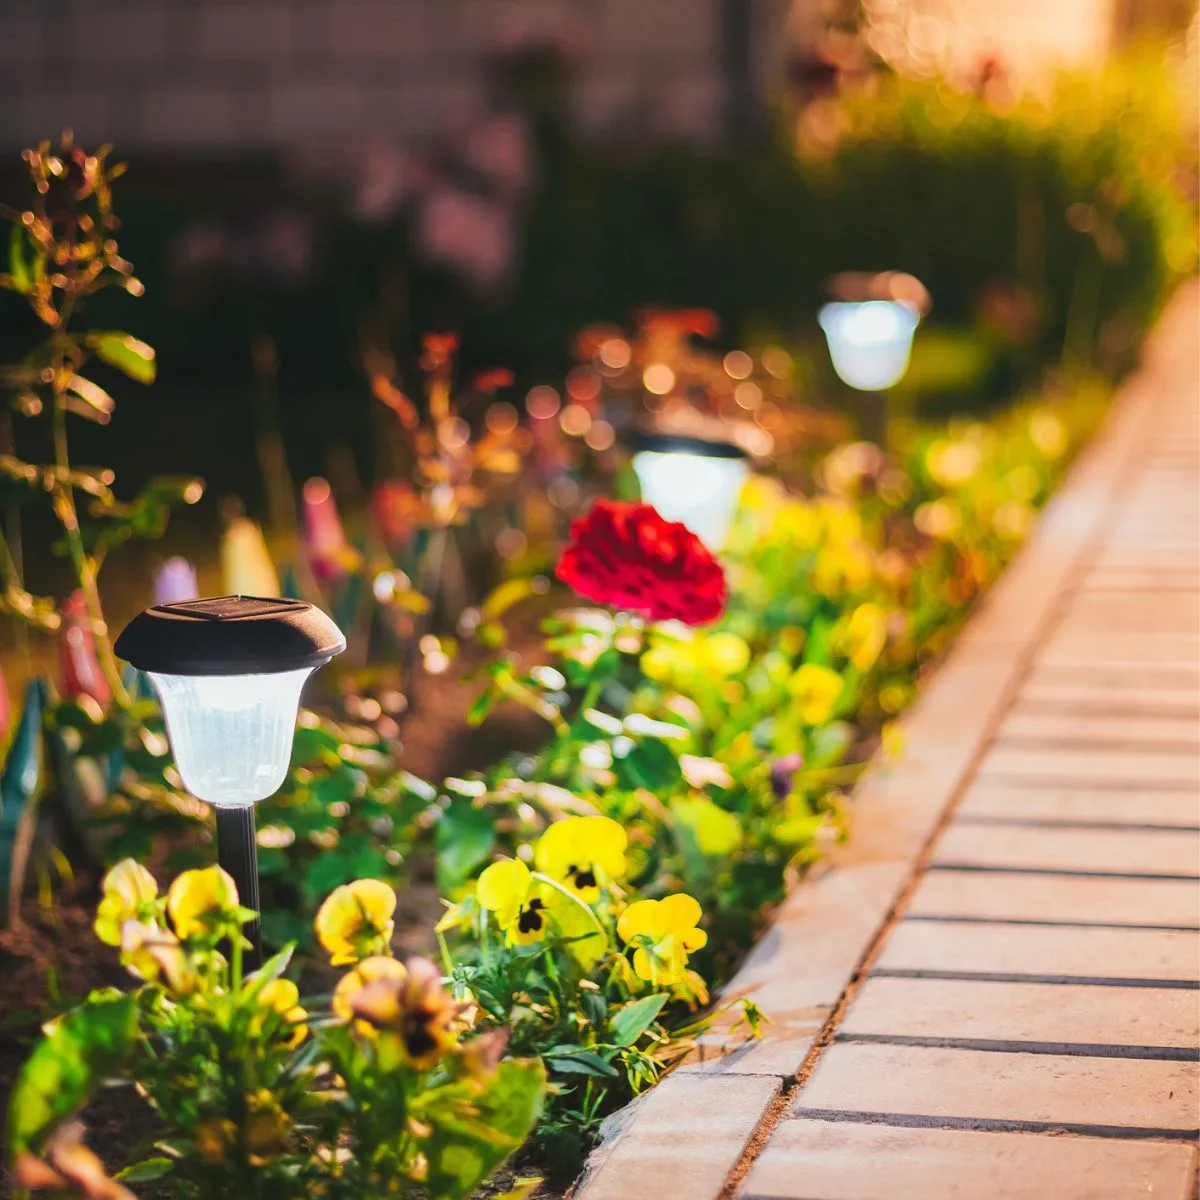 Simple solar lights line up a walkway surrounded by colorful flowers